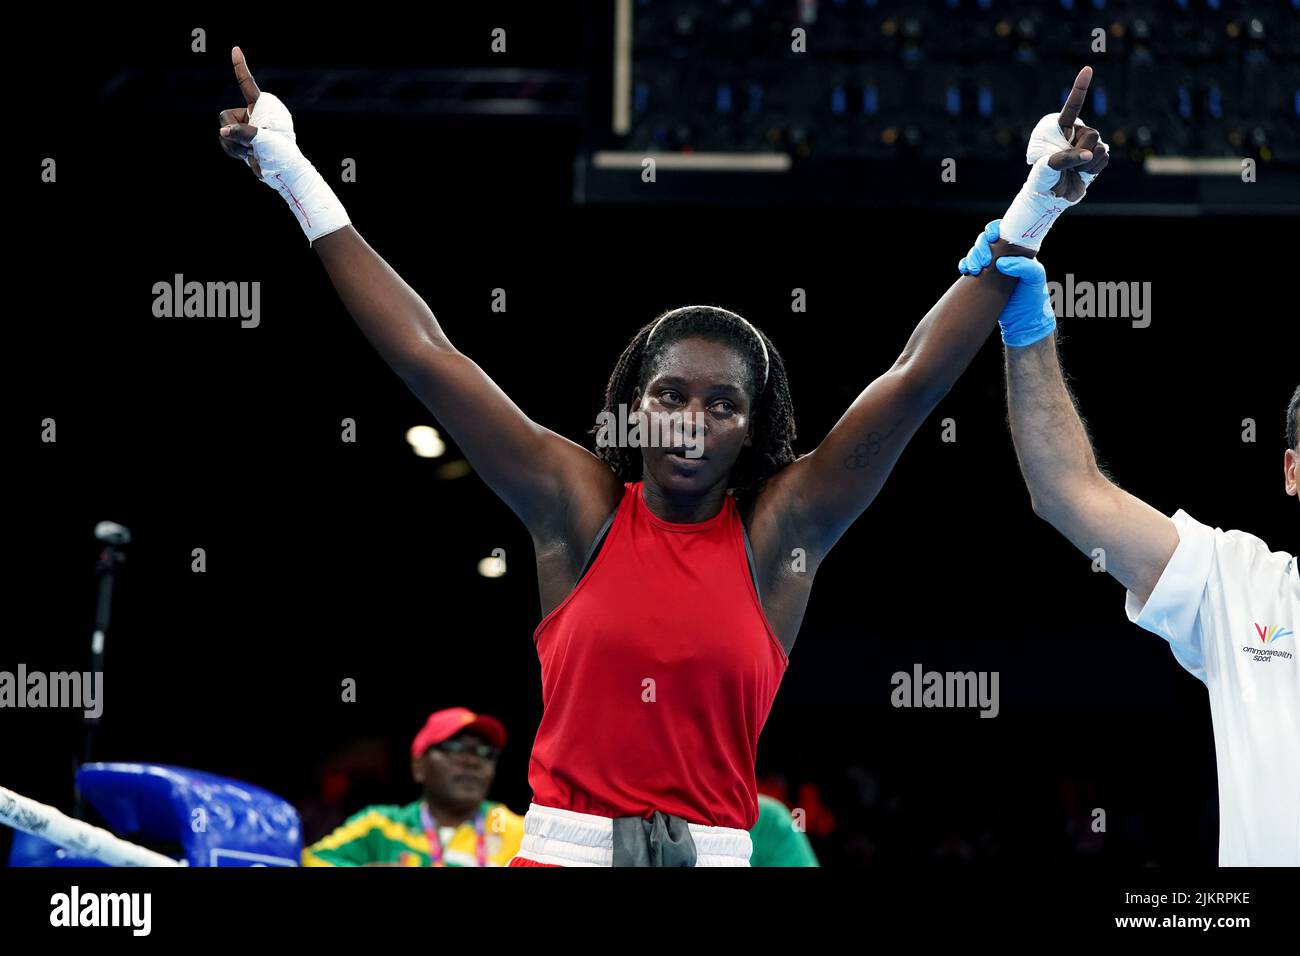 Mozambique's Alcinda Helena Panguana celebrates victory over Cameroon's Clotilde Essiane following the Women's Over 66kg-70kg (Light Middle) - Quarter-Final 1 at The NEC on day six of the 2022 Commonwealth Games in Birmingham. Picture date: Wednesday August 3, 2022. Stock Photo